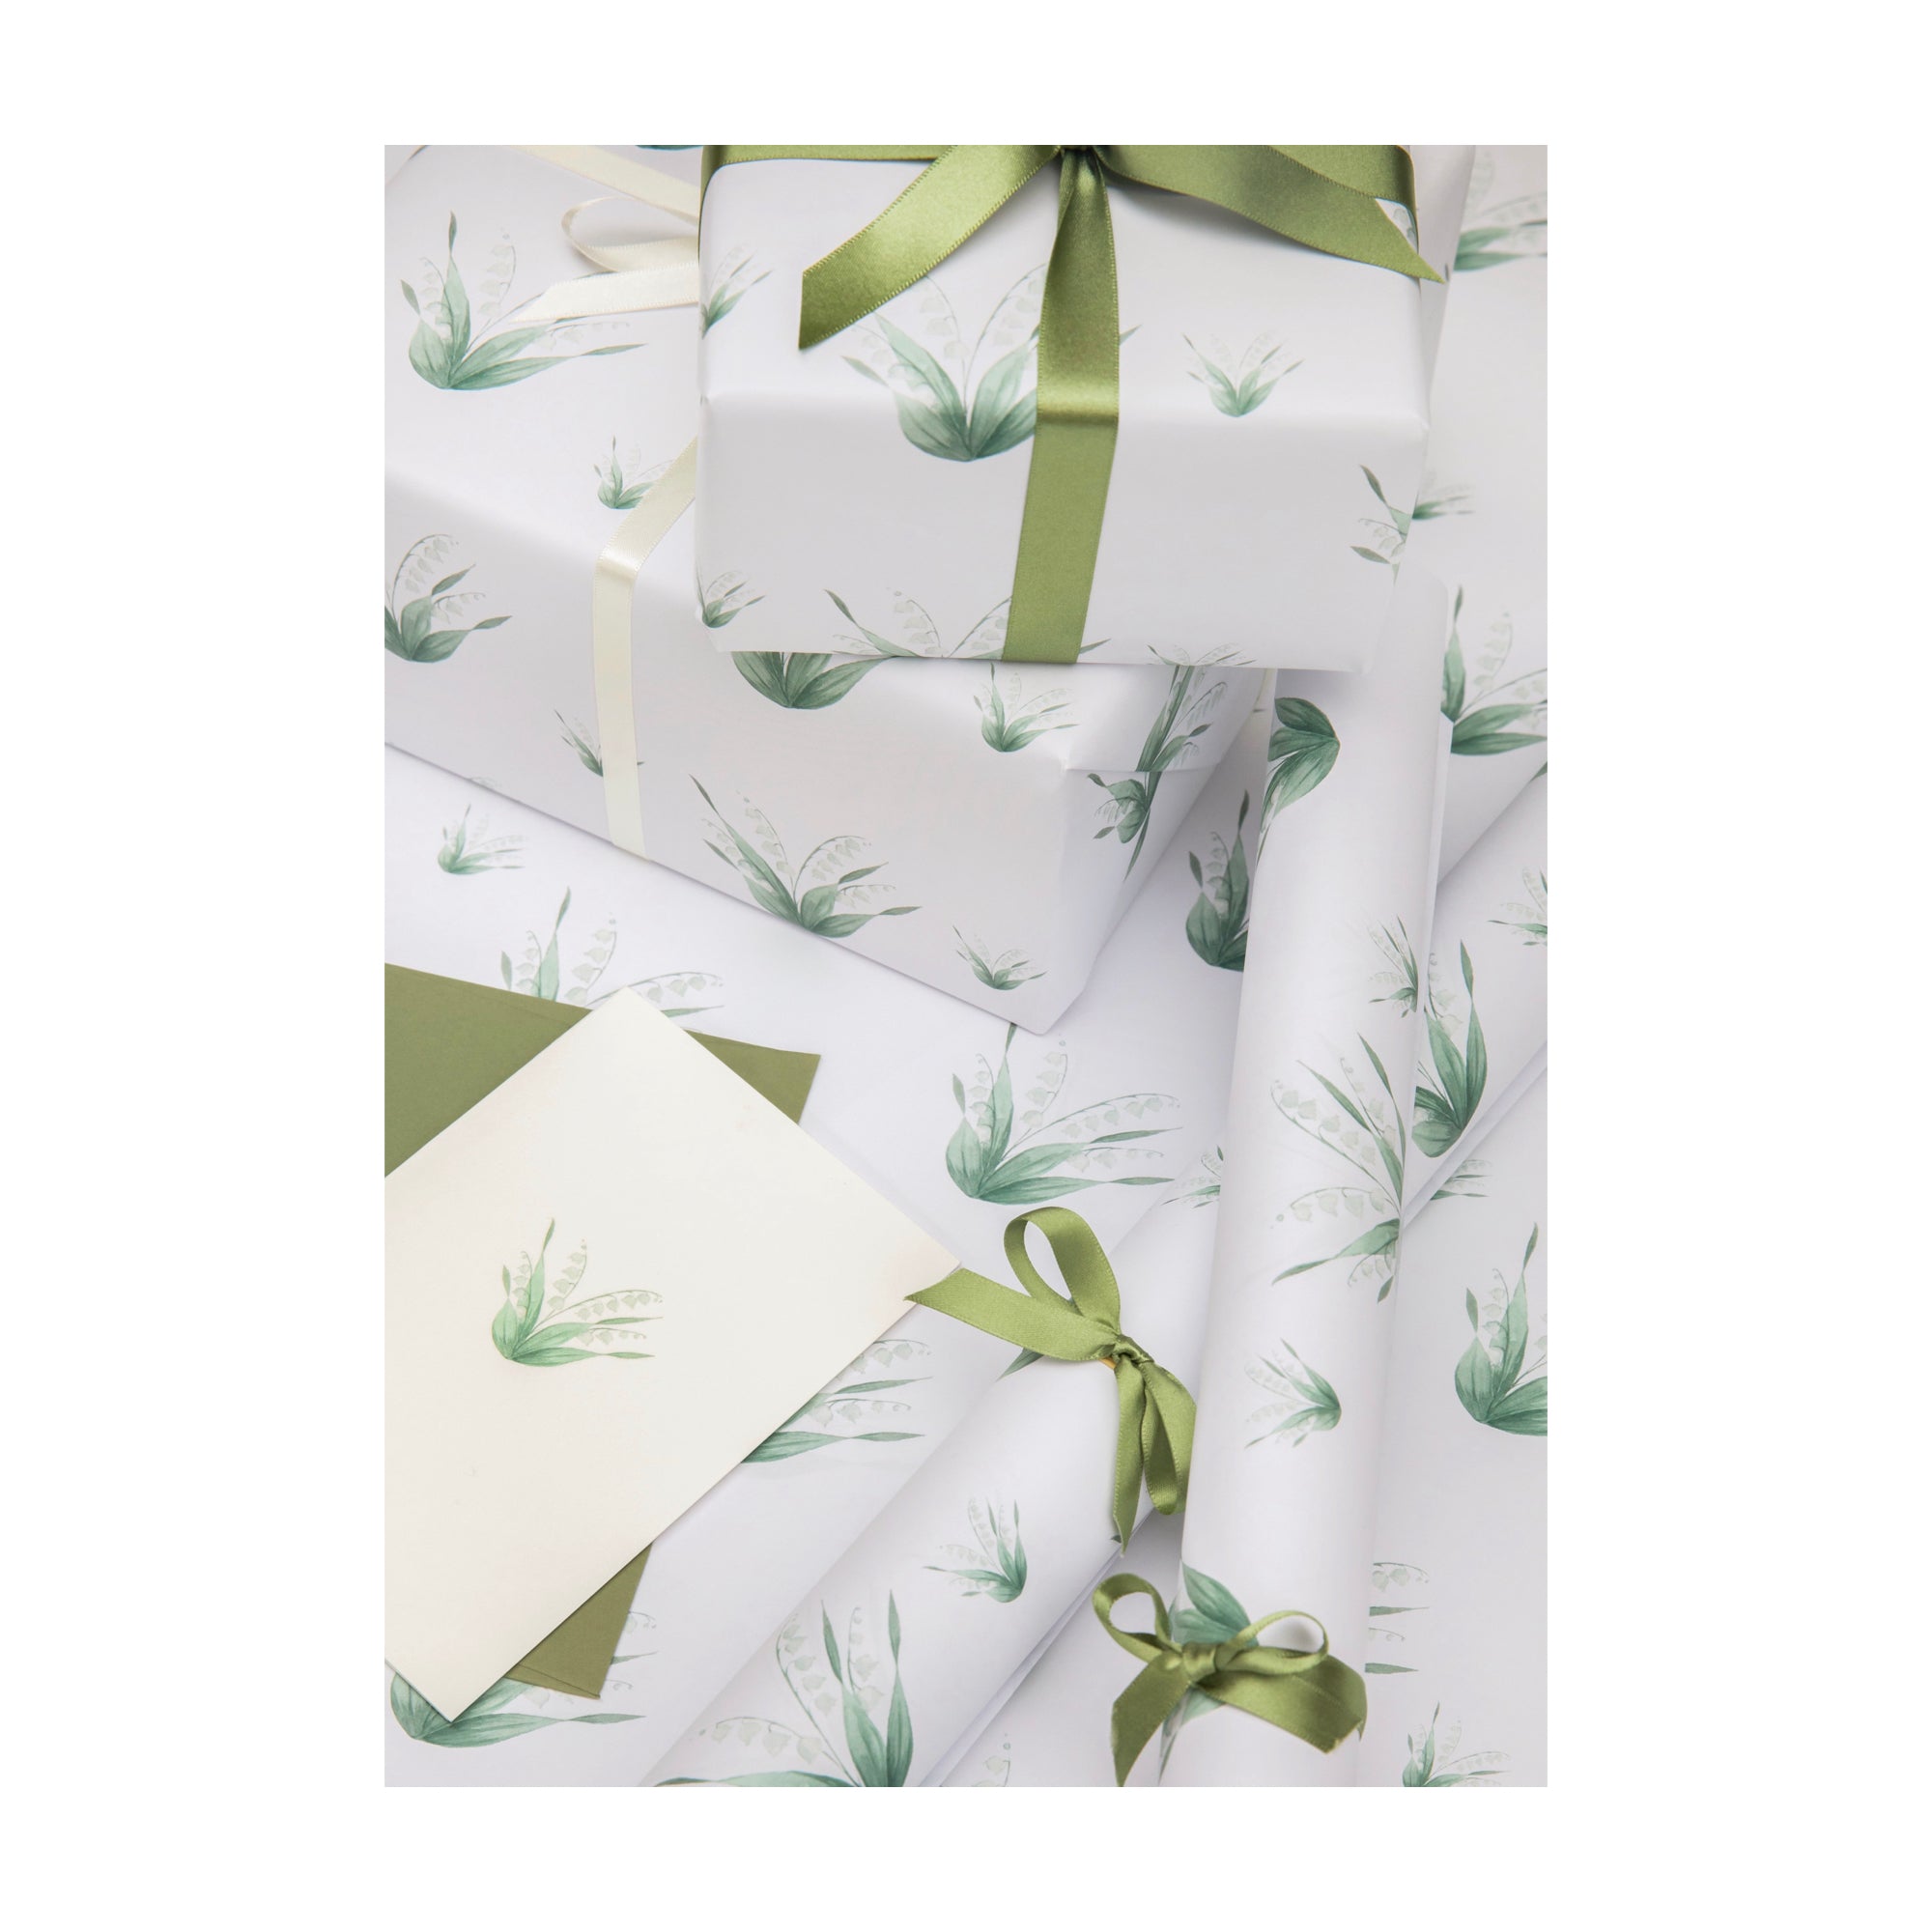 Lily of the Valley wrapping paper by Memo Press